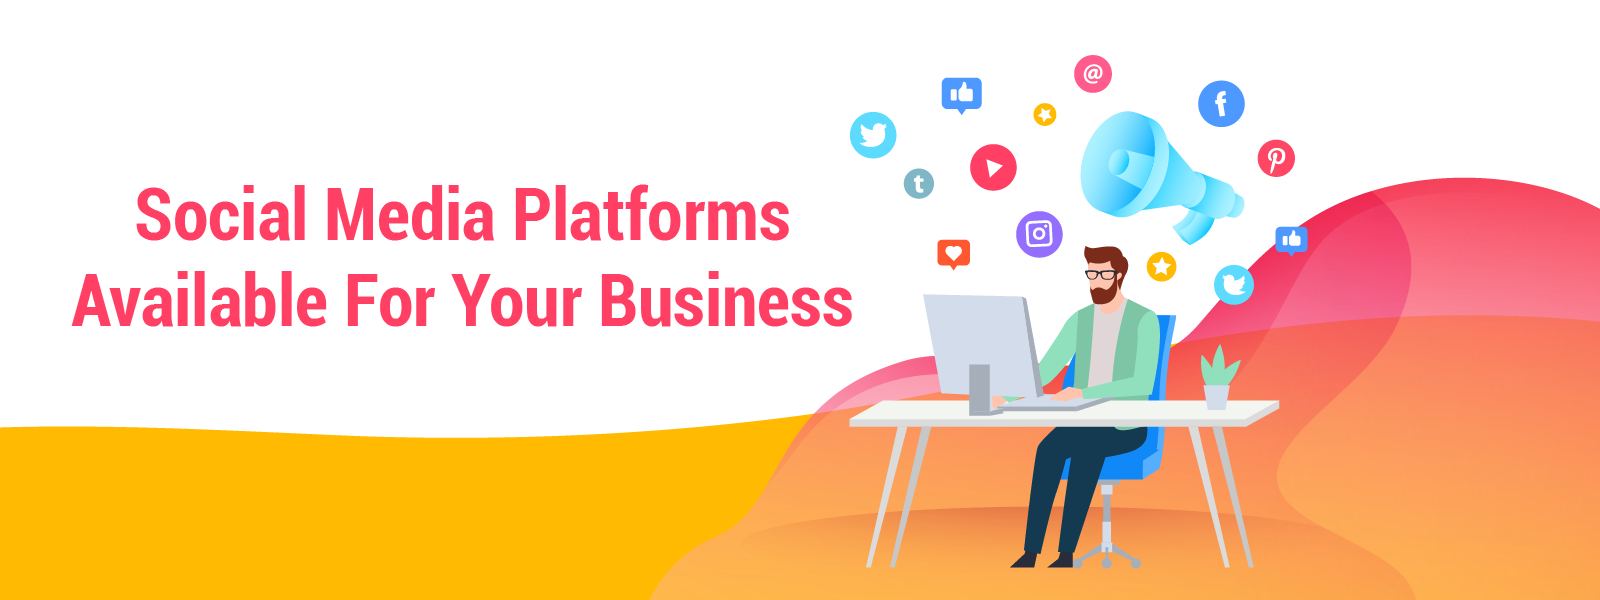 Social Media Platforms Available For Your Busines